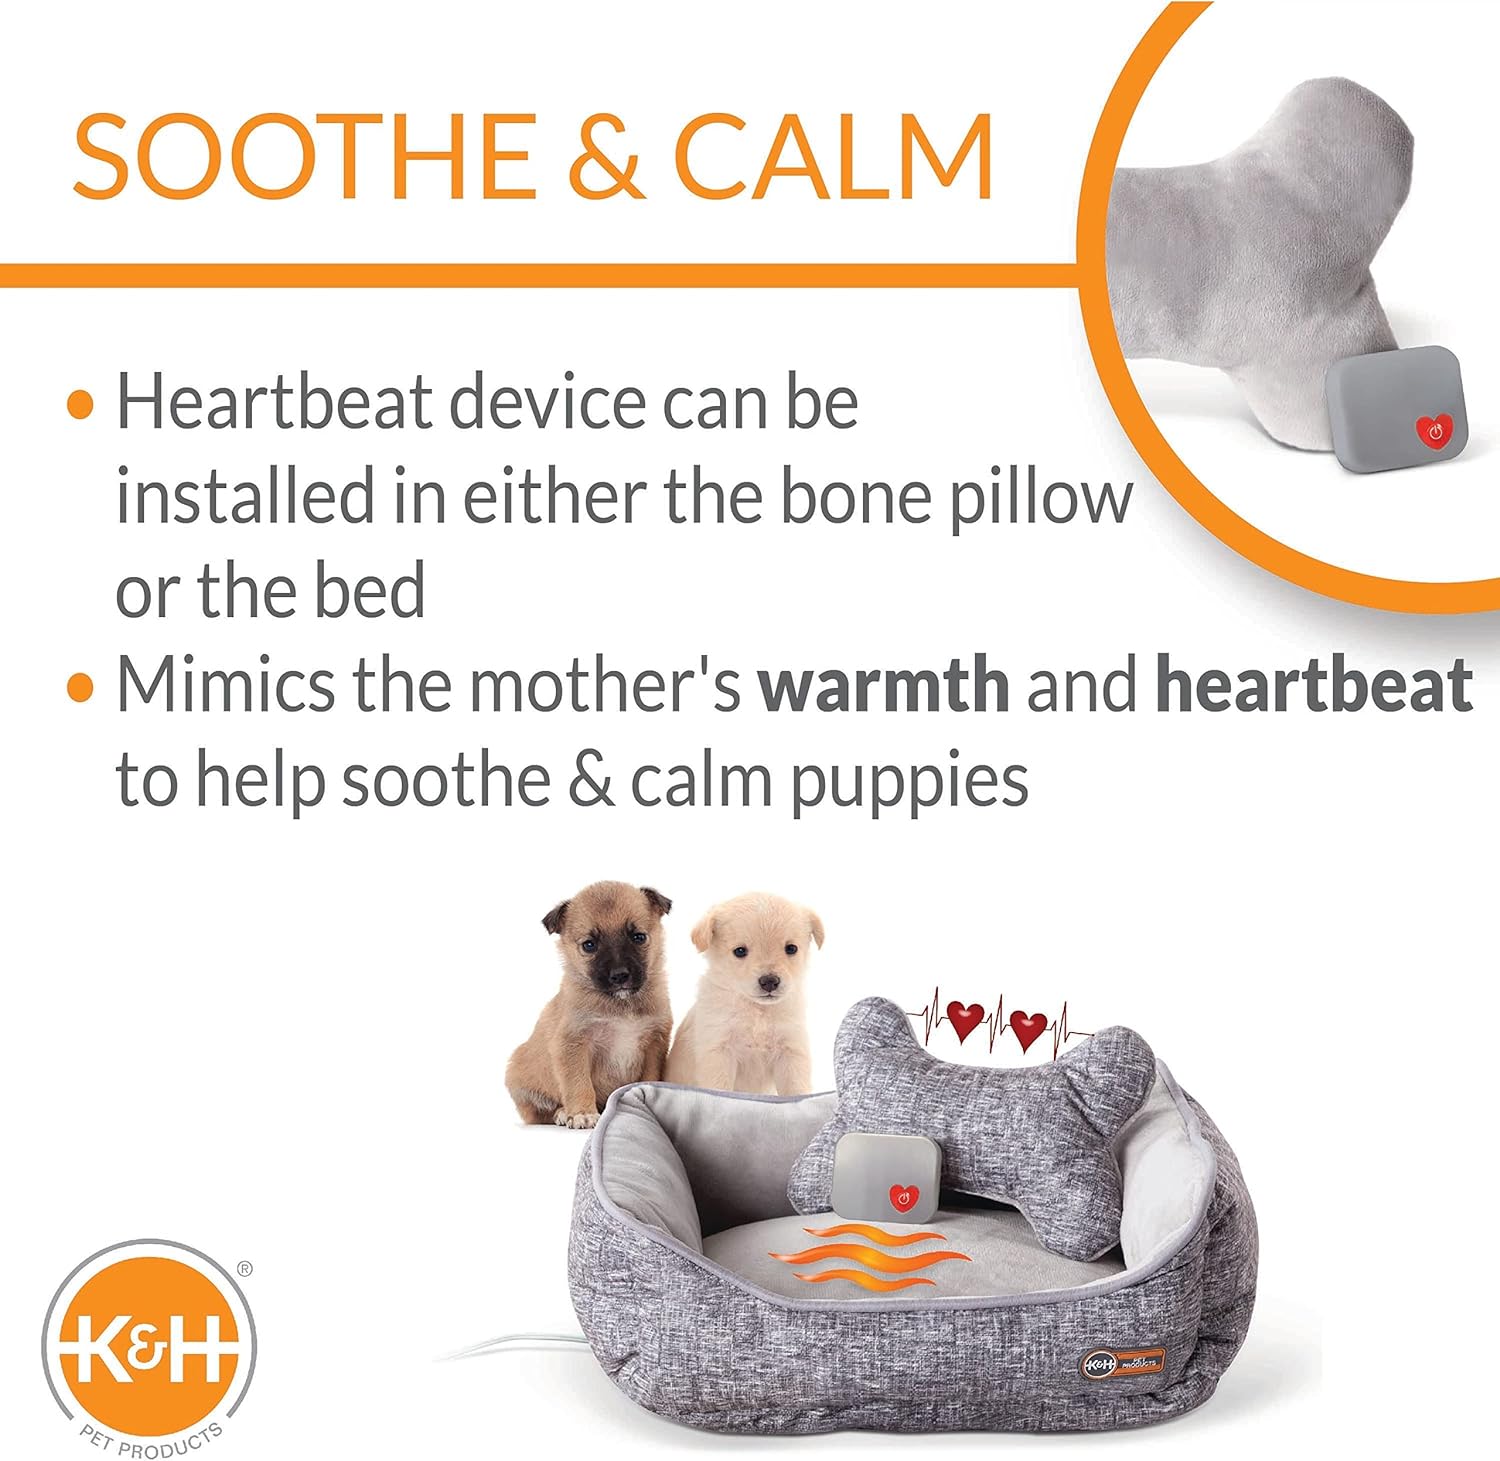 K&H Pet Products Mother's Heartbeat Heated Dog Bed with Bone Pillow Heartbeat Puppy Toy, New Puppy Essential Heated Puppy Bed + Dog Anxiety Toy - Gray 13 X 16 Inches w\/ Medium Breed Heartbeat Rhythm